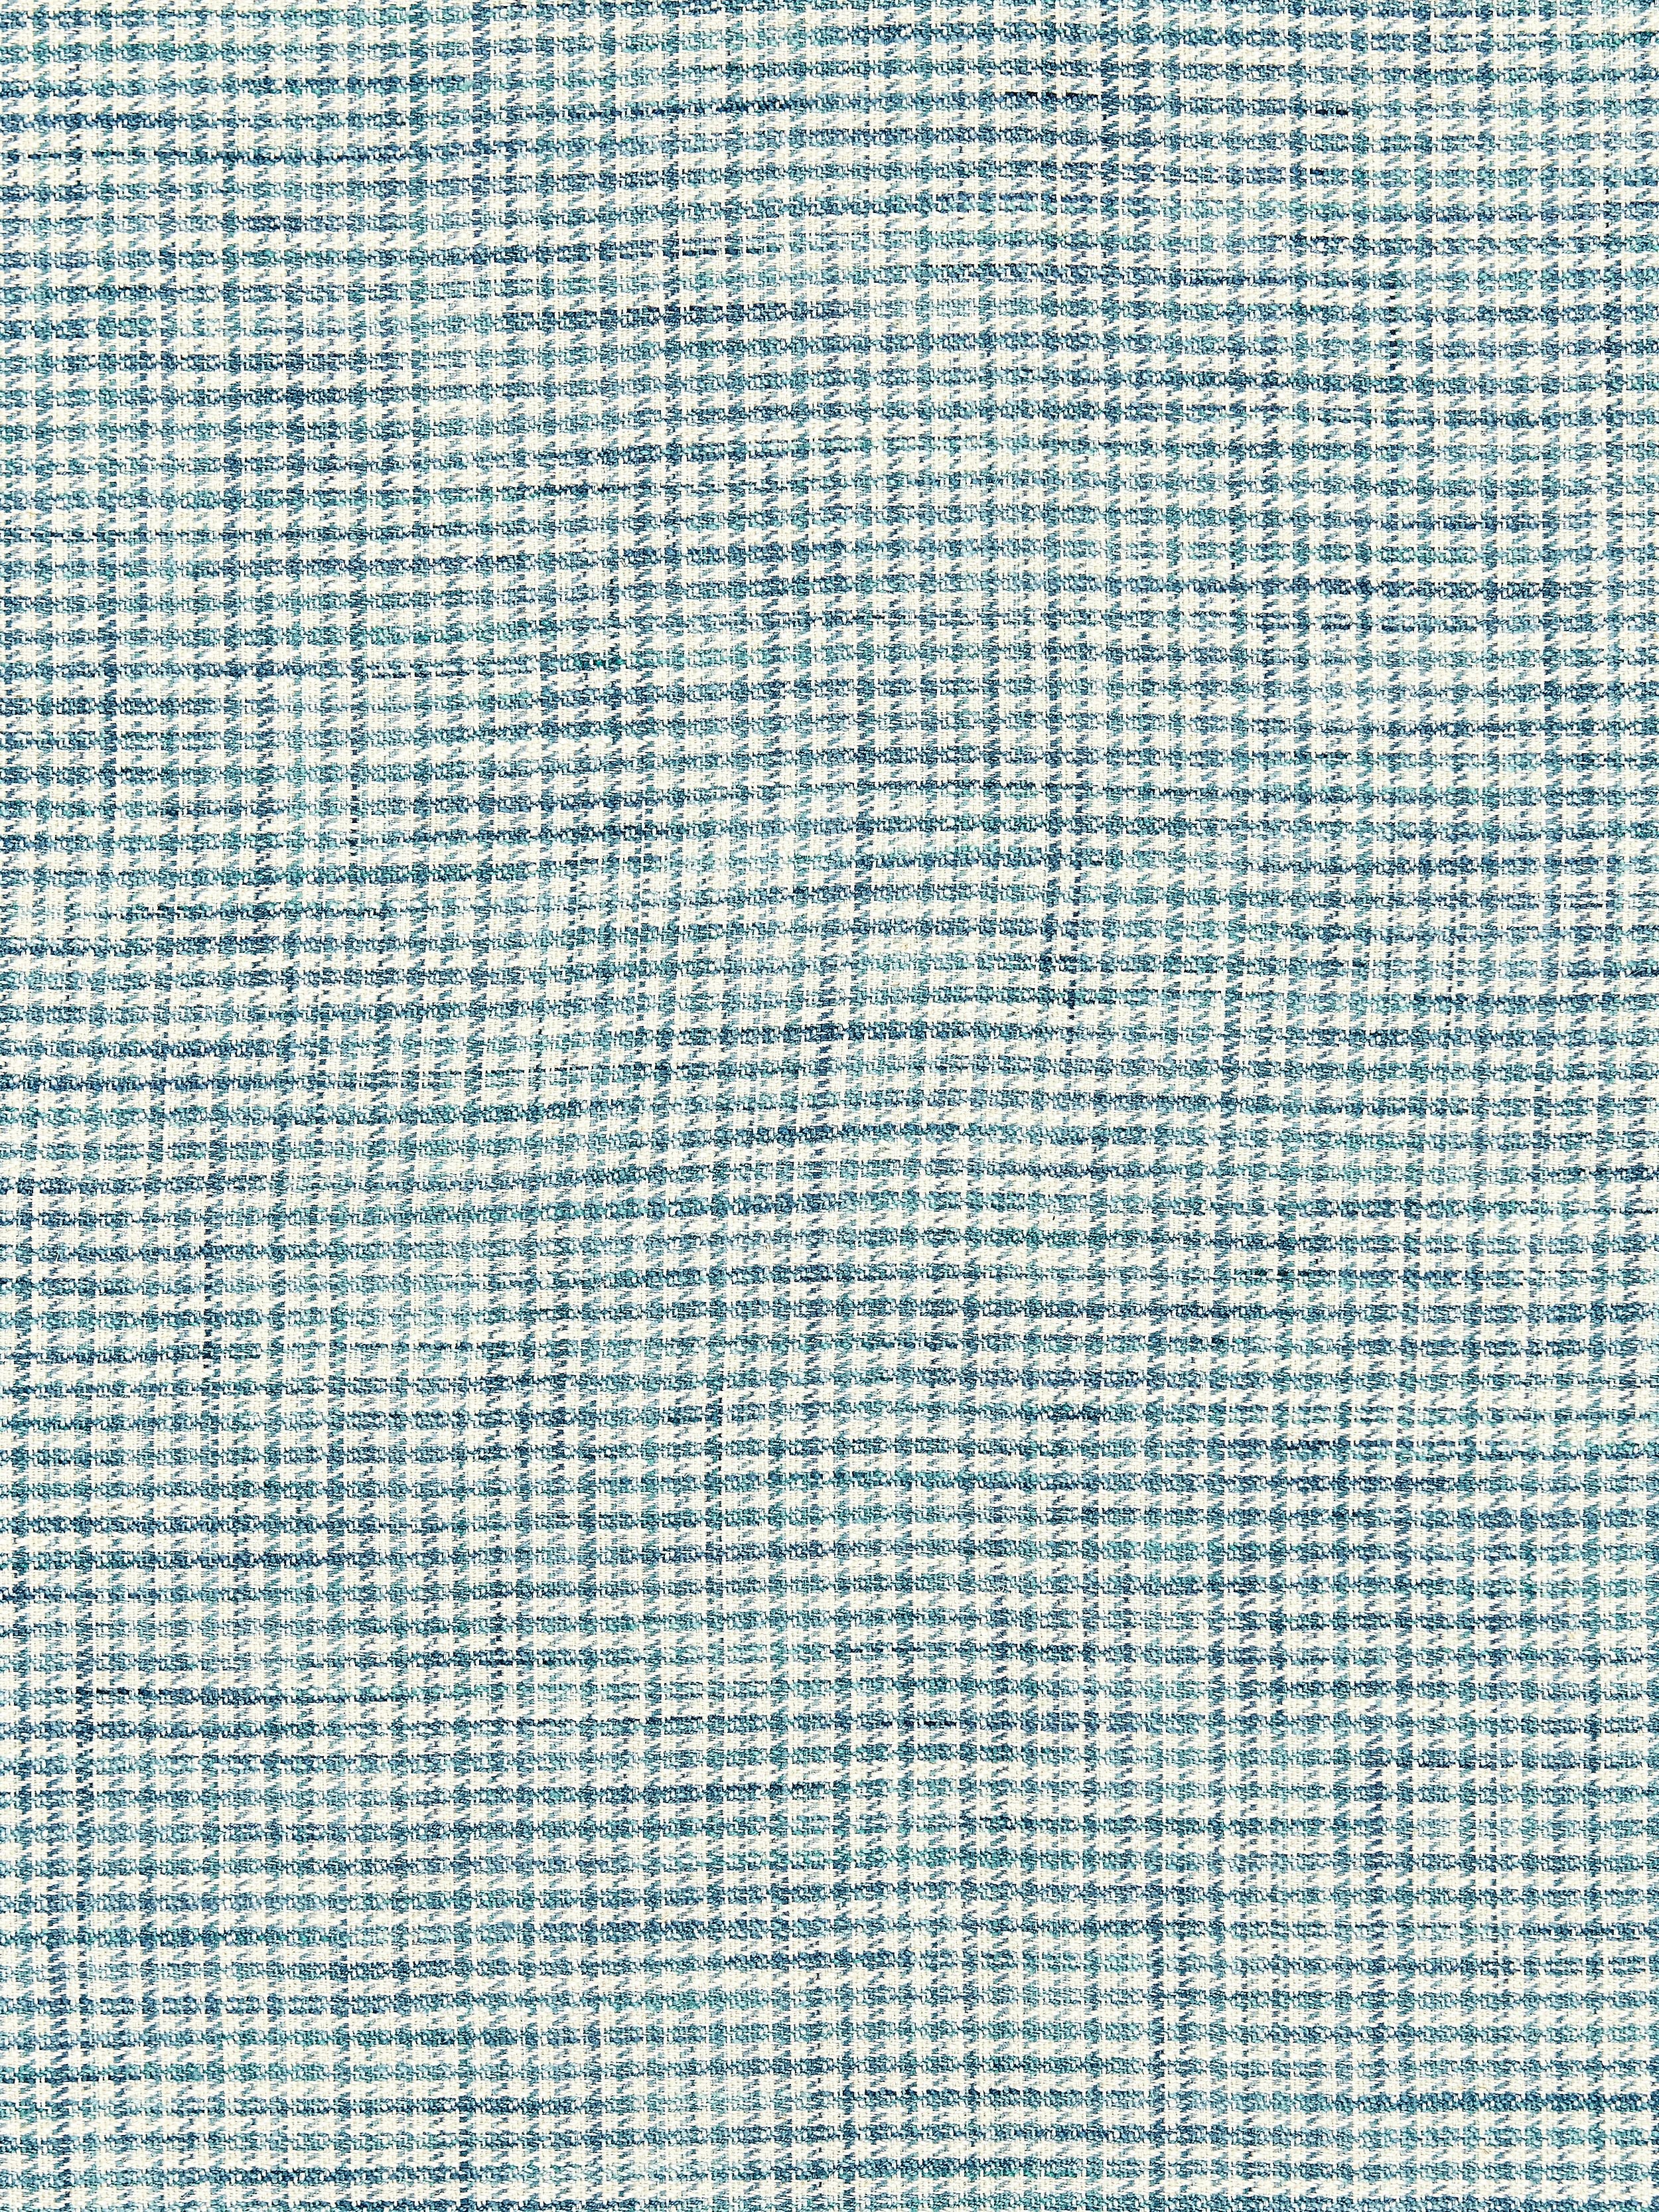 Banbury Strie Check fabric in peacock color - pattern number SC 000327099 - by Scalamandre in the Scalamandre Fabrics Book 1 collection